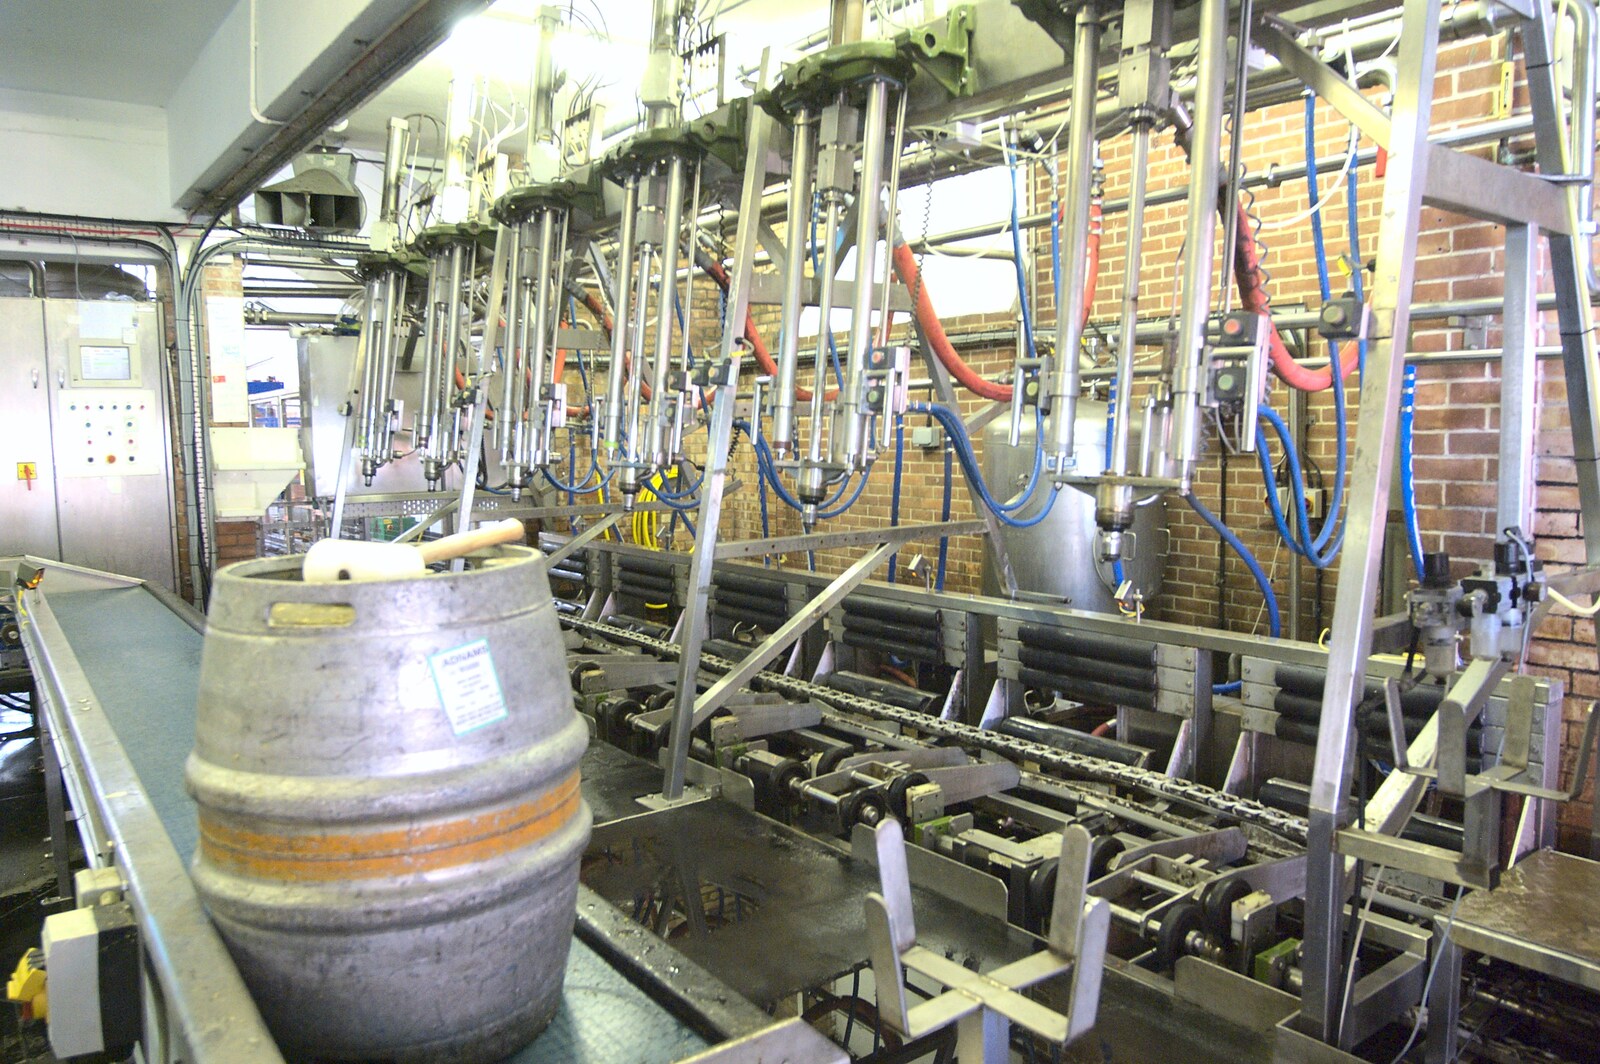 The barrel-filling end of the brewing line from A "Minimoon" and an Adnams Brewery Trip, Southwold, Suffolk - 7th July 2010